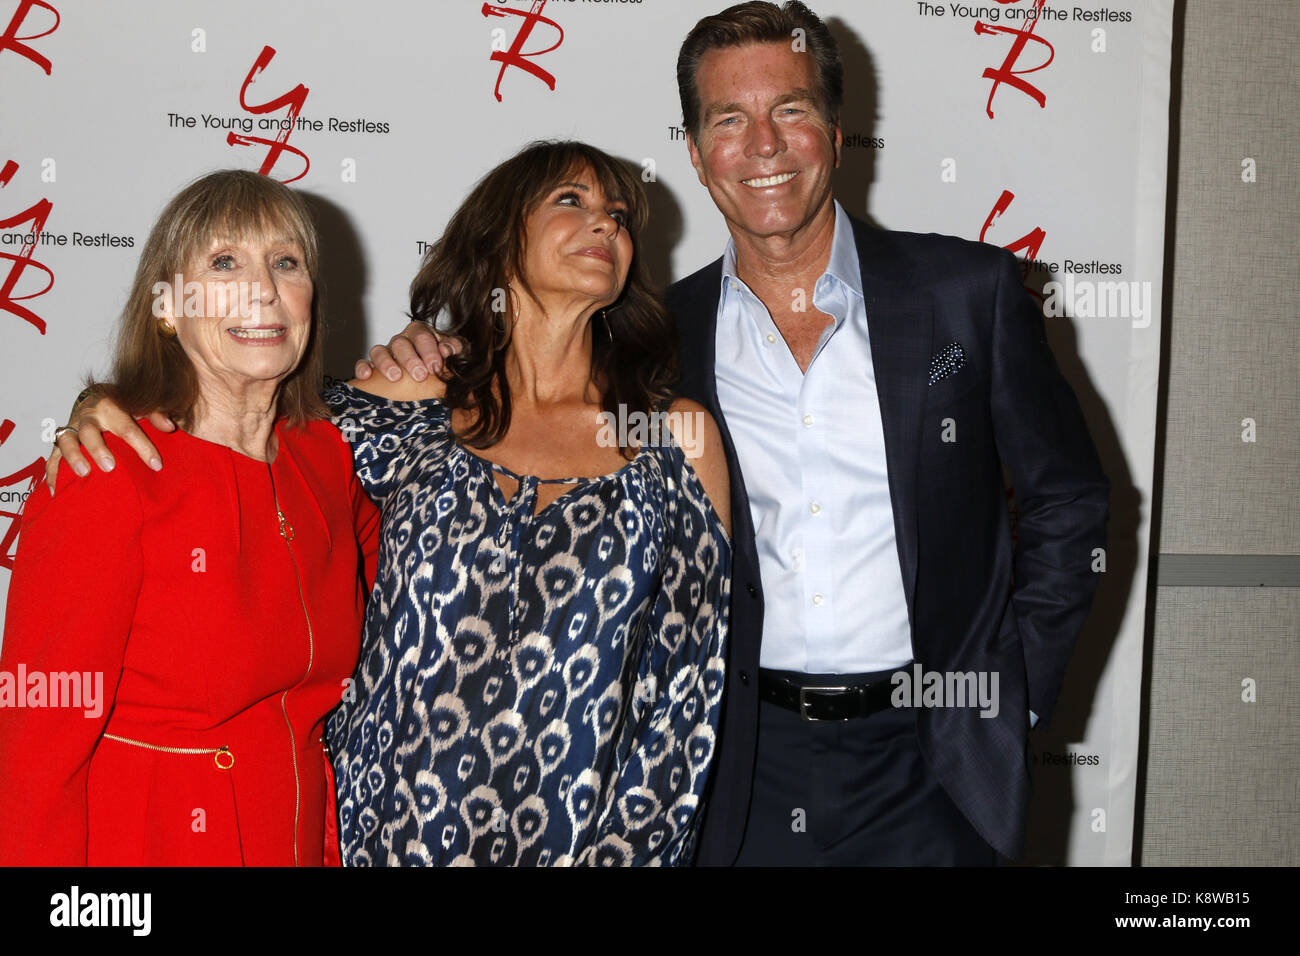 Young and Restless Fan Event 2017 at the Marriott Burbank Convention Center on August 19, 2017 in Burbank, CA  Featuring: Marla Adams, Jess Walton, Peter Bergman Where: Burbank, California, United States When: 20 Aug 2017 Credit: Nicky Nelson/WENN.com Stock Photo